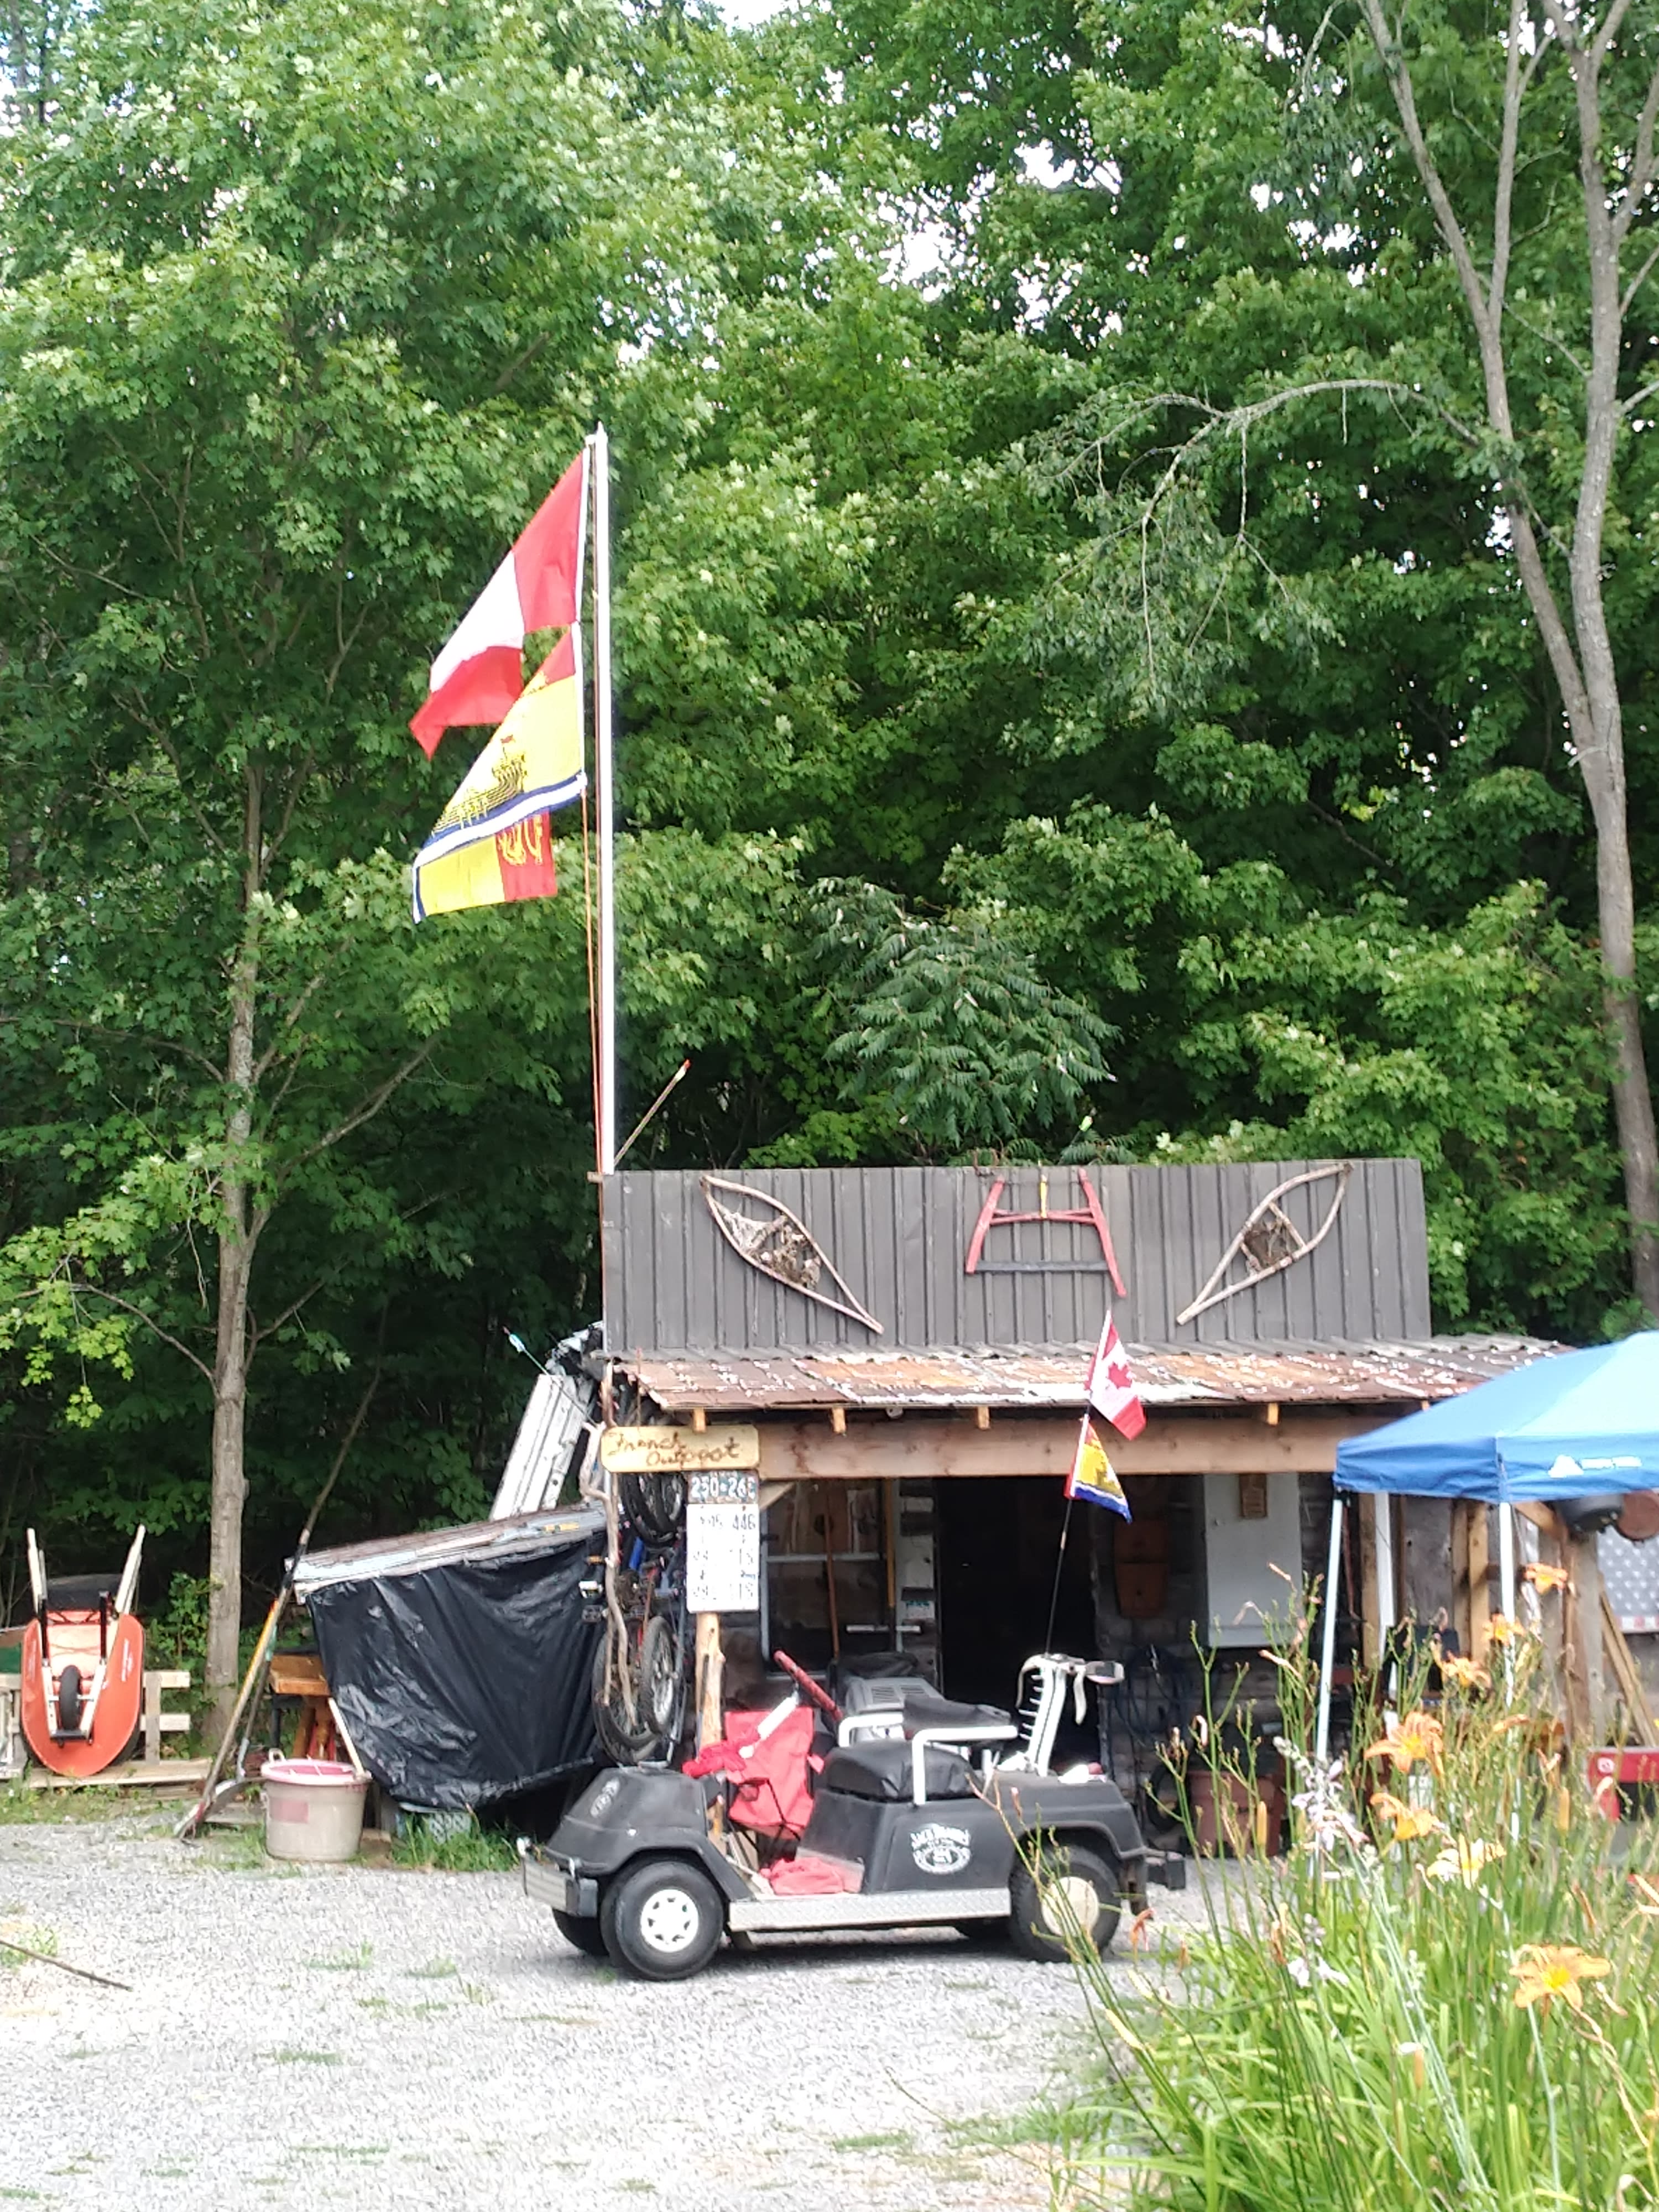 This area is Pépé's French Outpost with the Golf Cart to match. Canadian & New Brunswick Flags